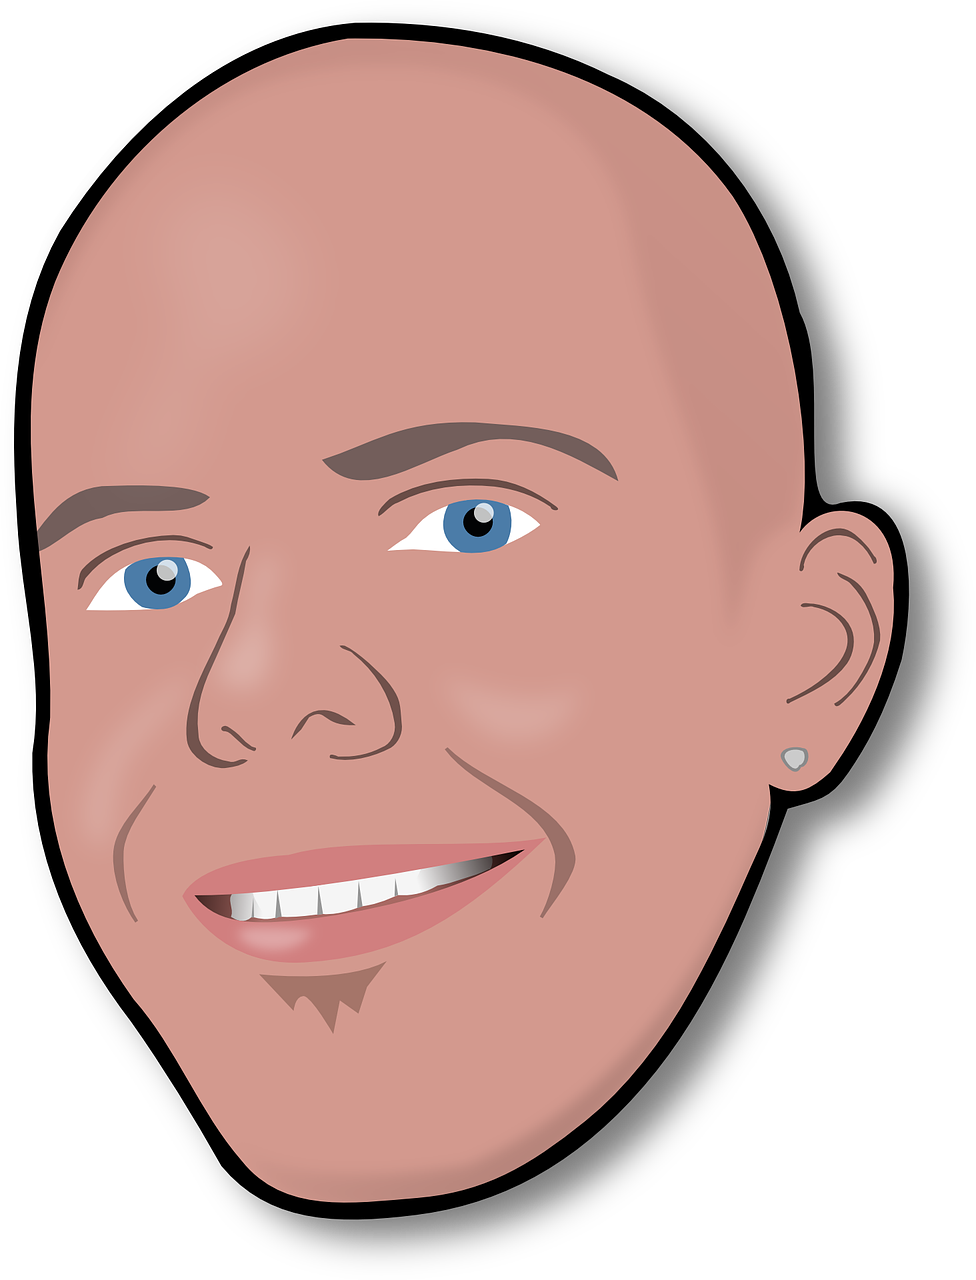 Clipart image of a bald man